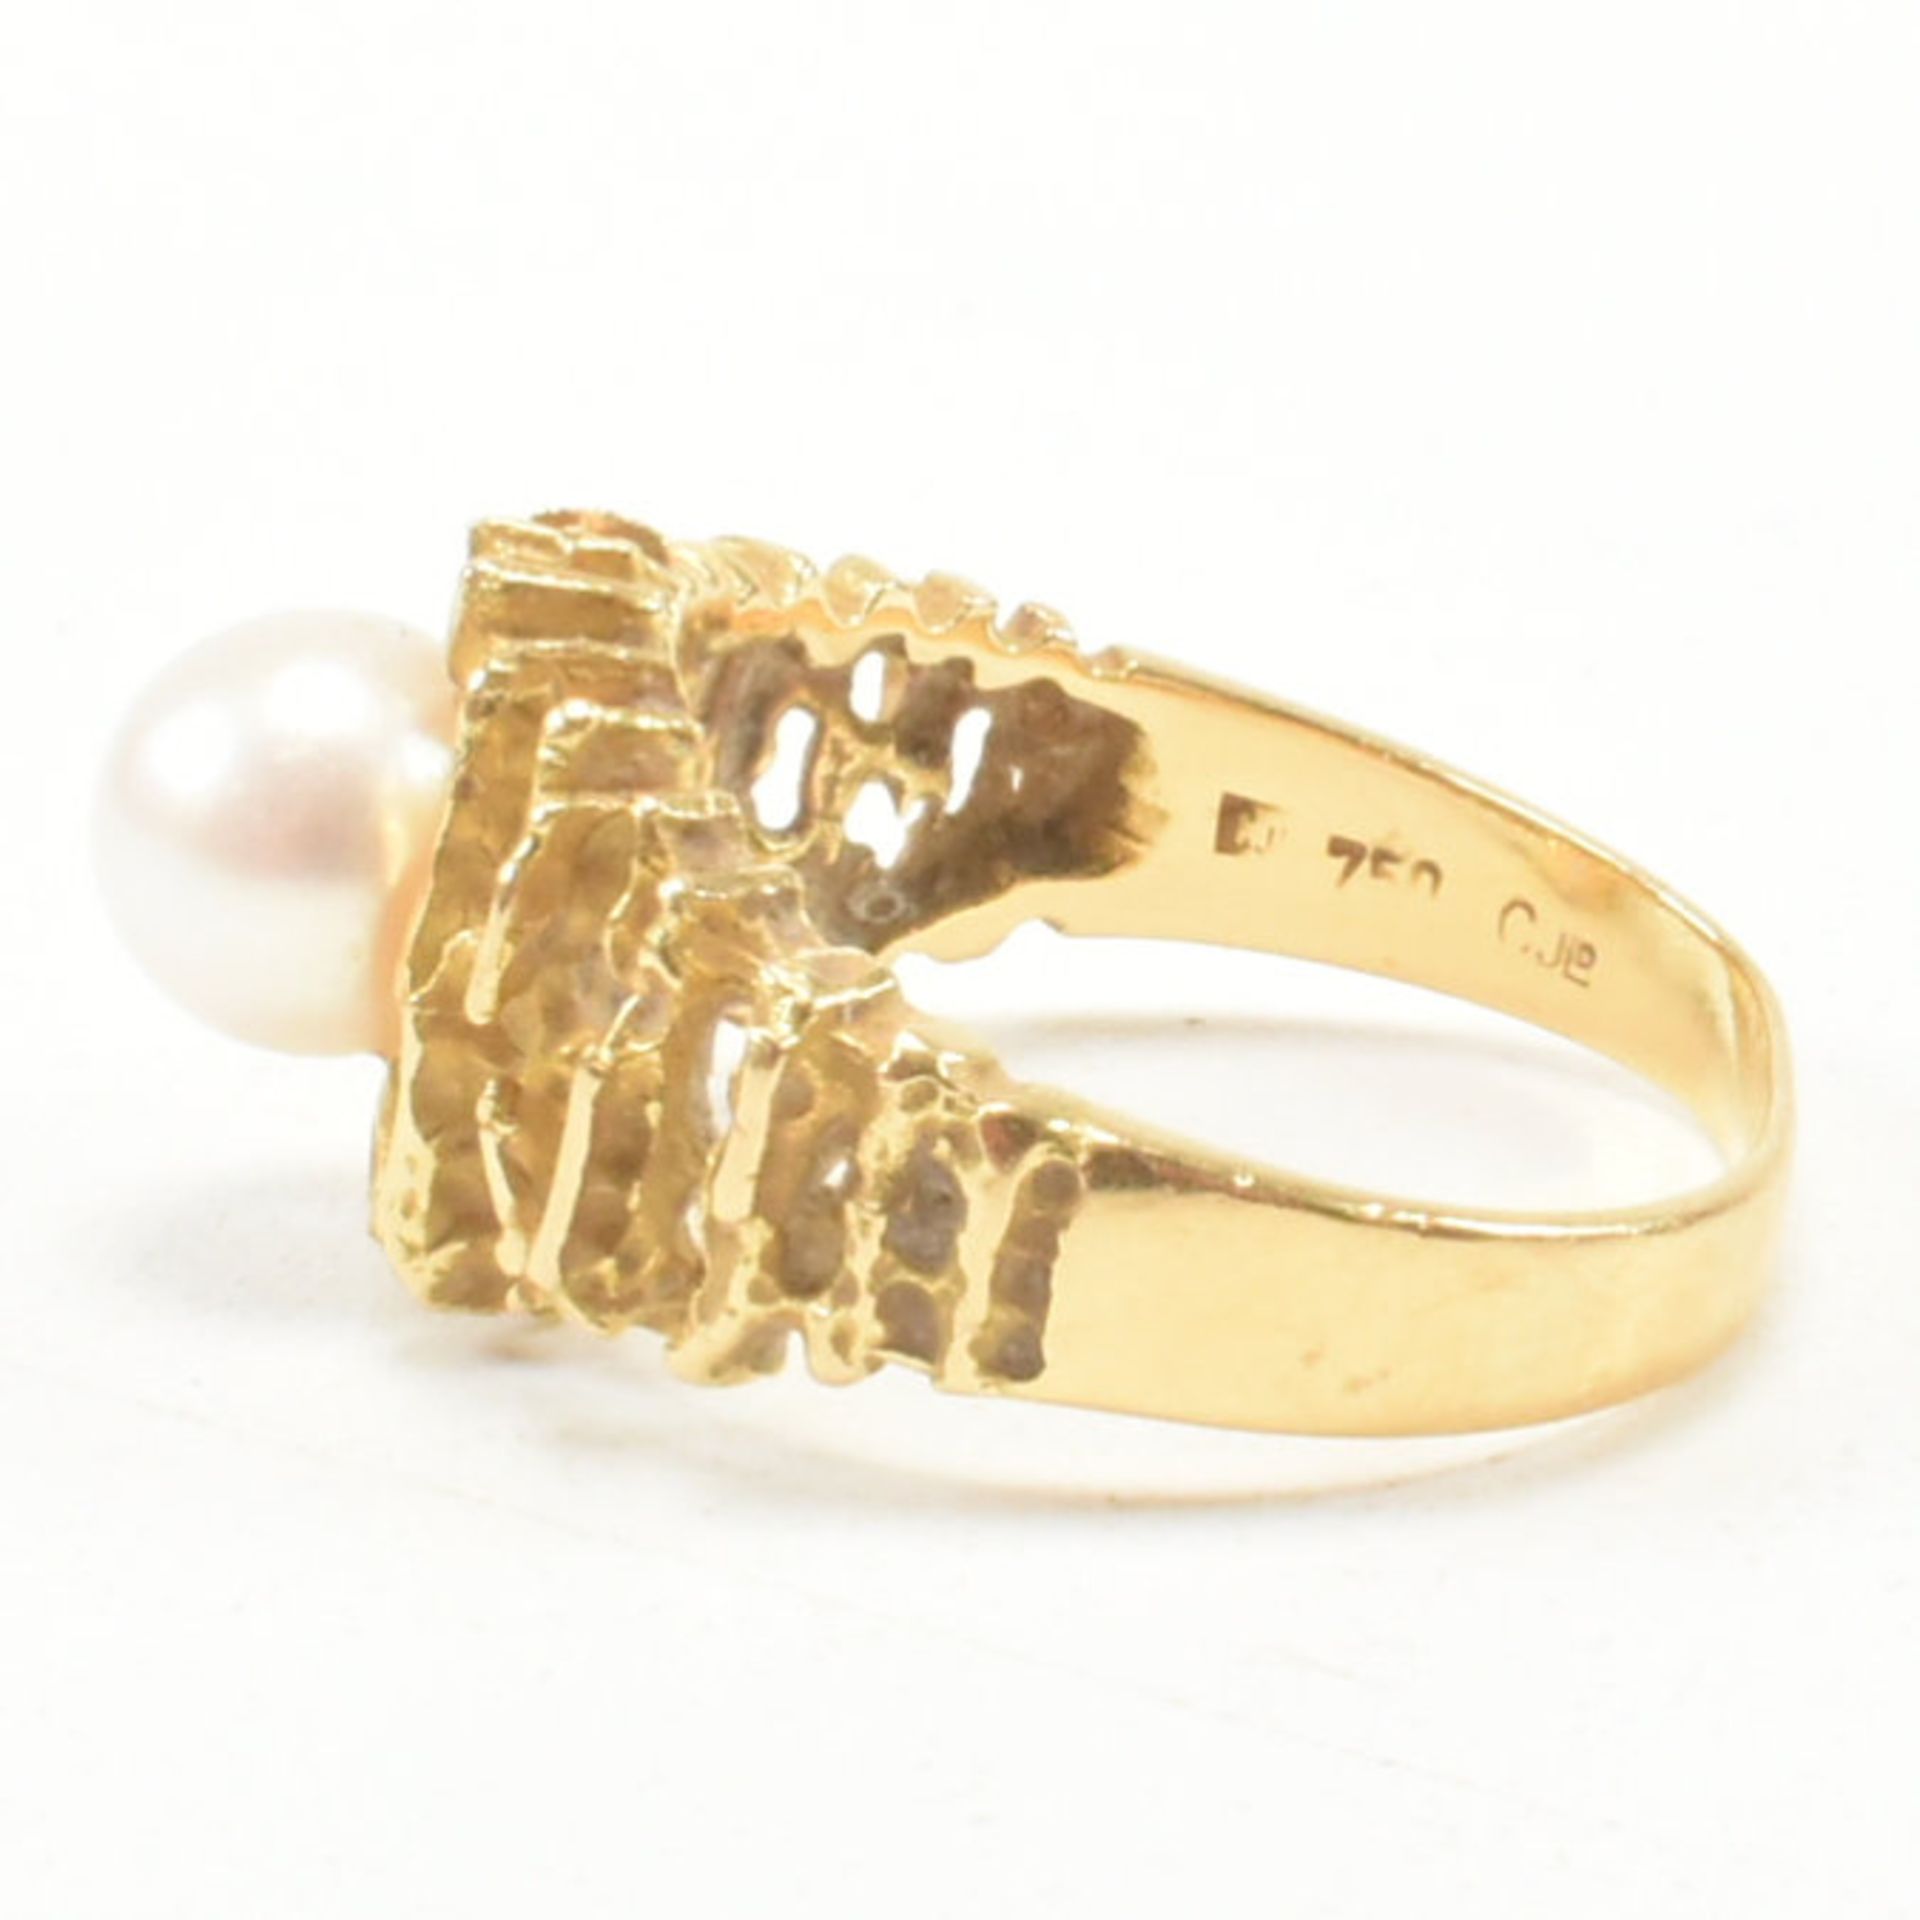 VINTAGE 18CT GOLD & PEARL DRESS RING - Image 4 of 7